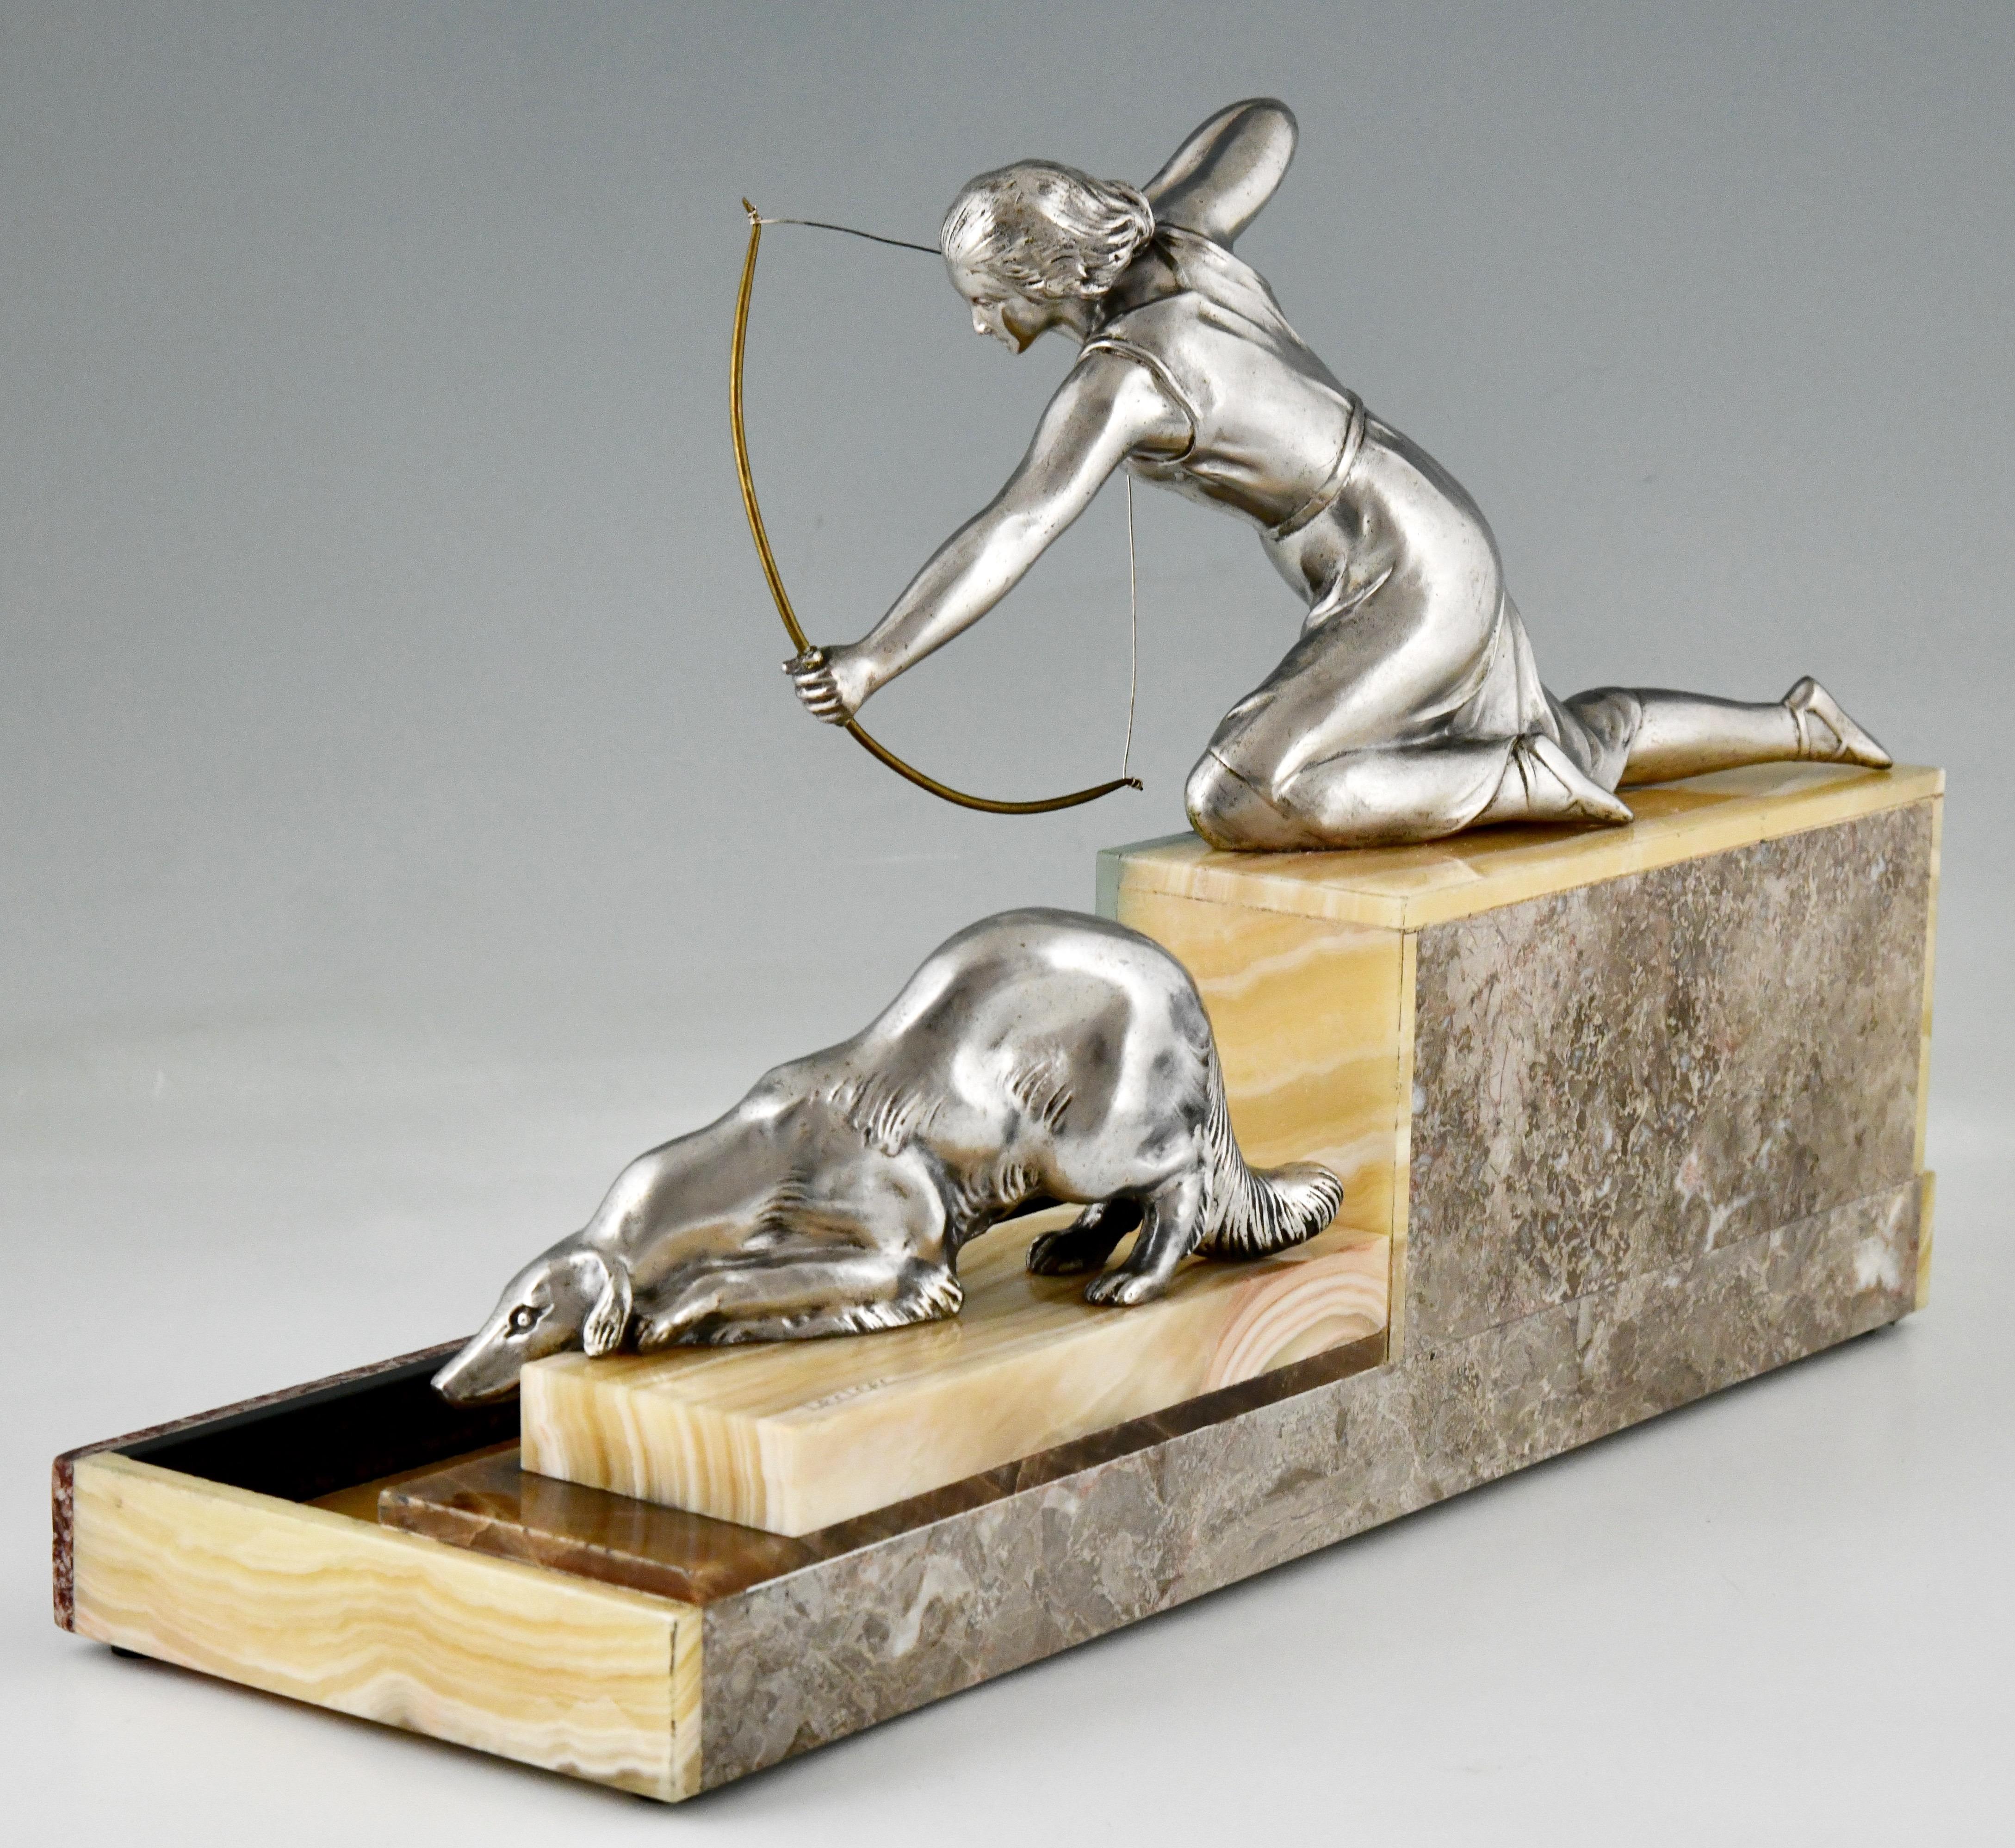 Mid-20th Century Art Deco sculptural tray Diana the huntress by Leclerc, France 1930